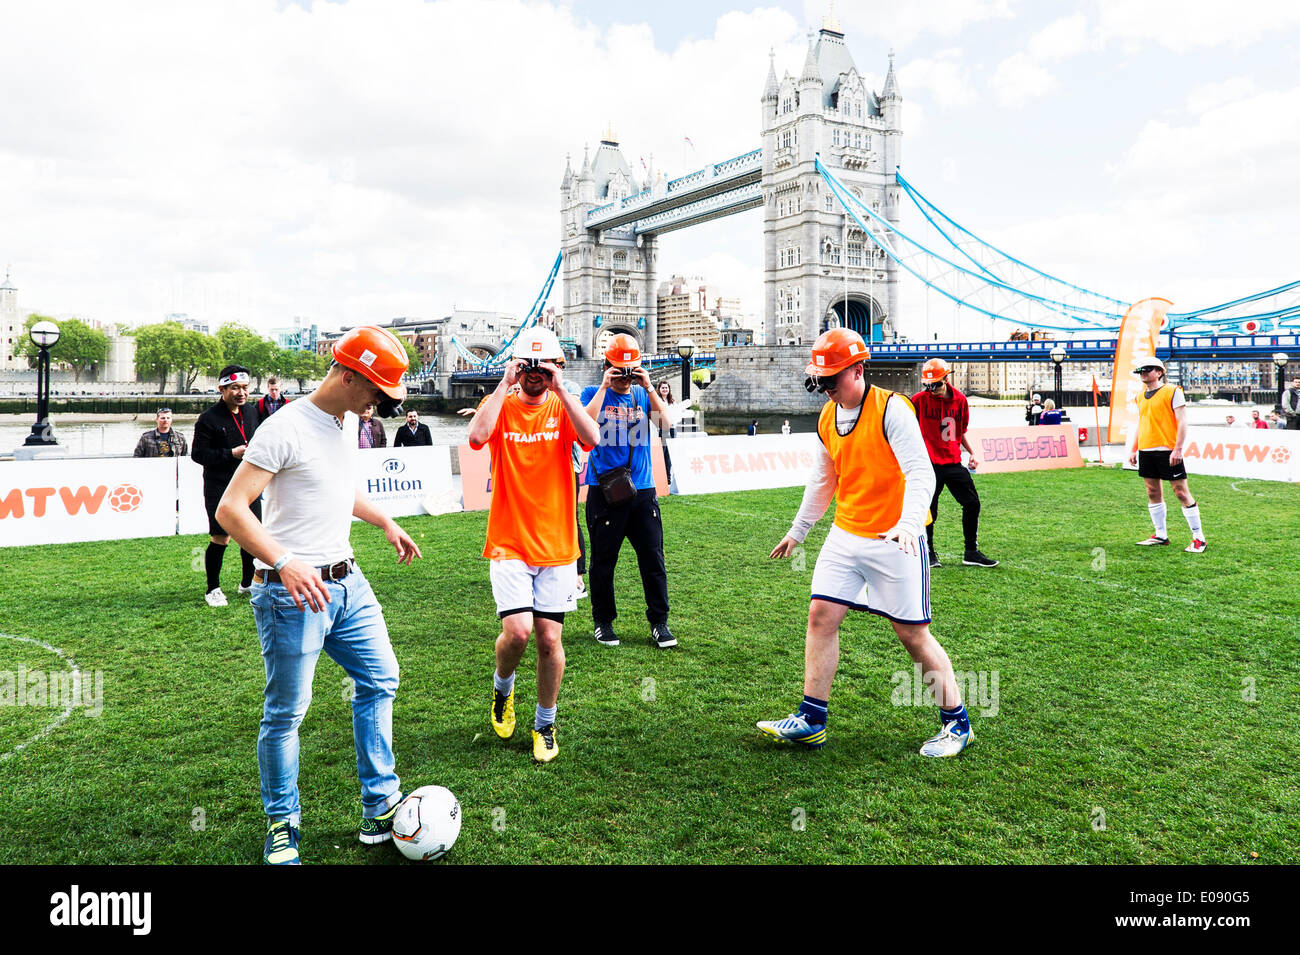 London, UK. 6th May, 2014.  Yo! Sushi, the iconic sushi restaurant asks the UK to support Japan as its second team in the upcoming World Cup tournament this summer.  The #TEAMTWO campaign is launched today with games of Japanese Binocular Soccer on London's Southbank. Binocular soccer is popular in Japan due to the optical eye pieces worn that makes everything look miles away. Credit:  Gordon Scammell/Alamy Live News Stock Photo